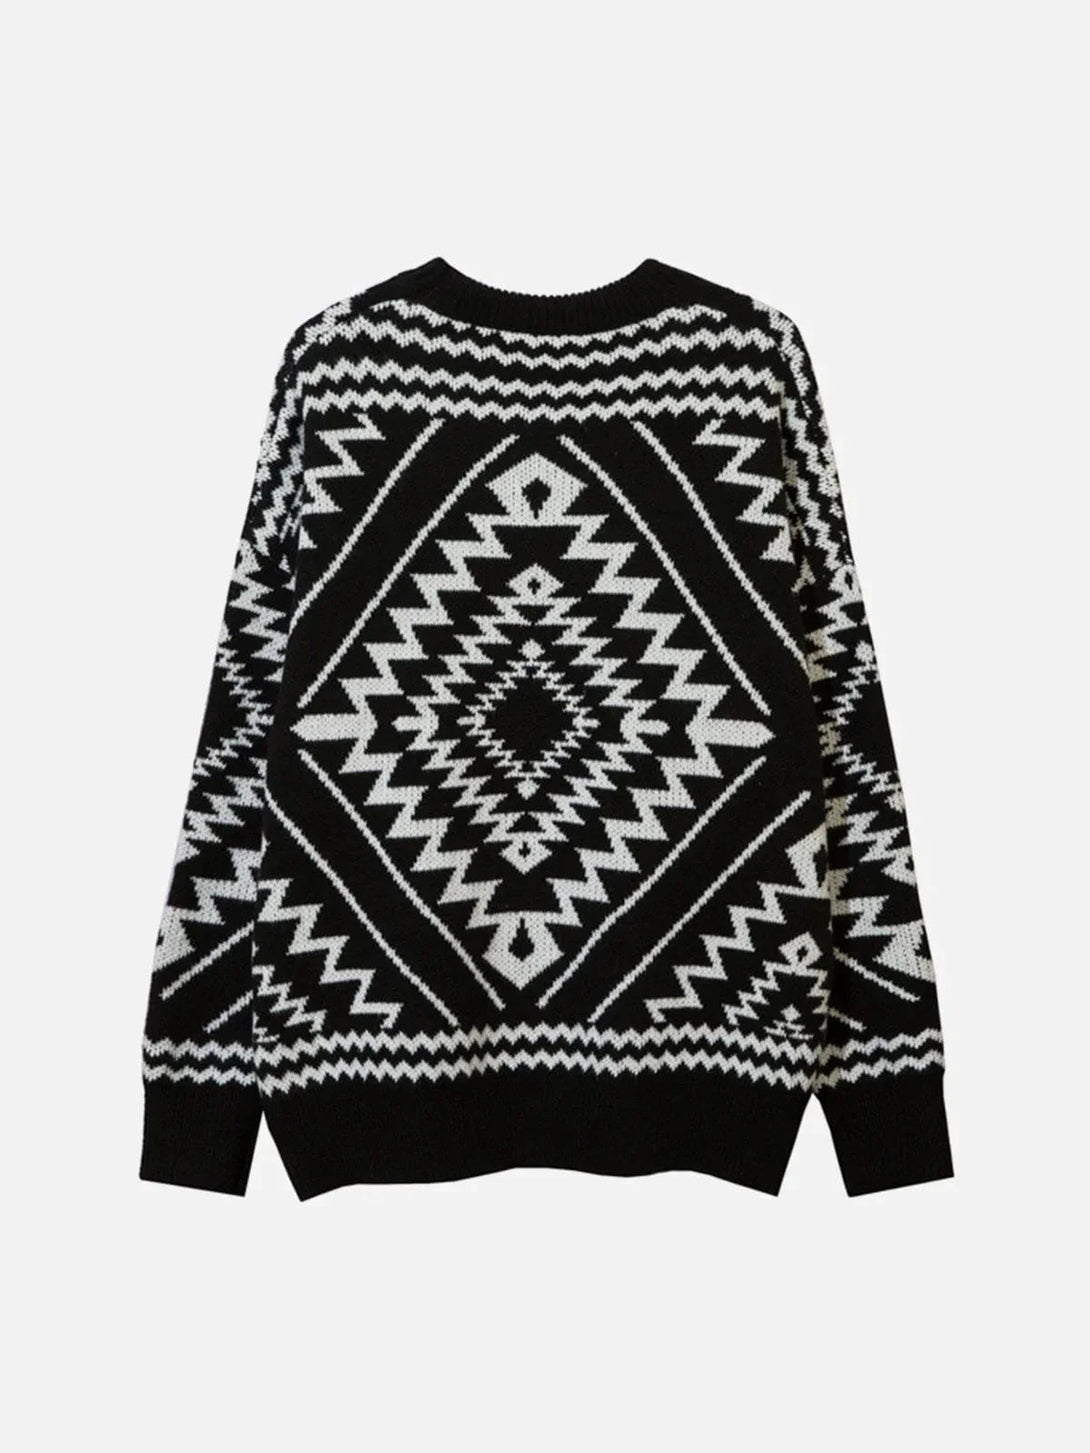 Majesda® - Totem Graphic Sweater outfit ideas streetwear fashion